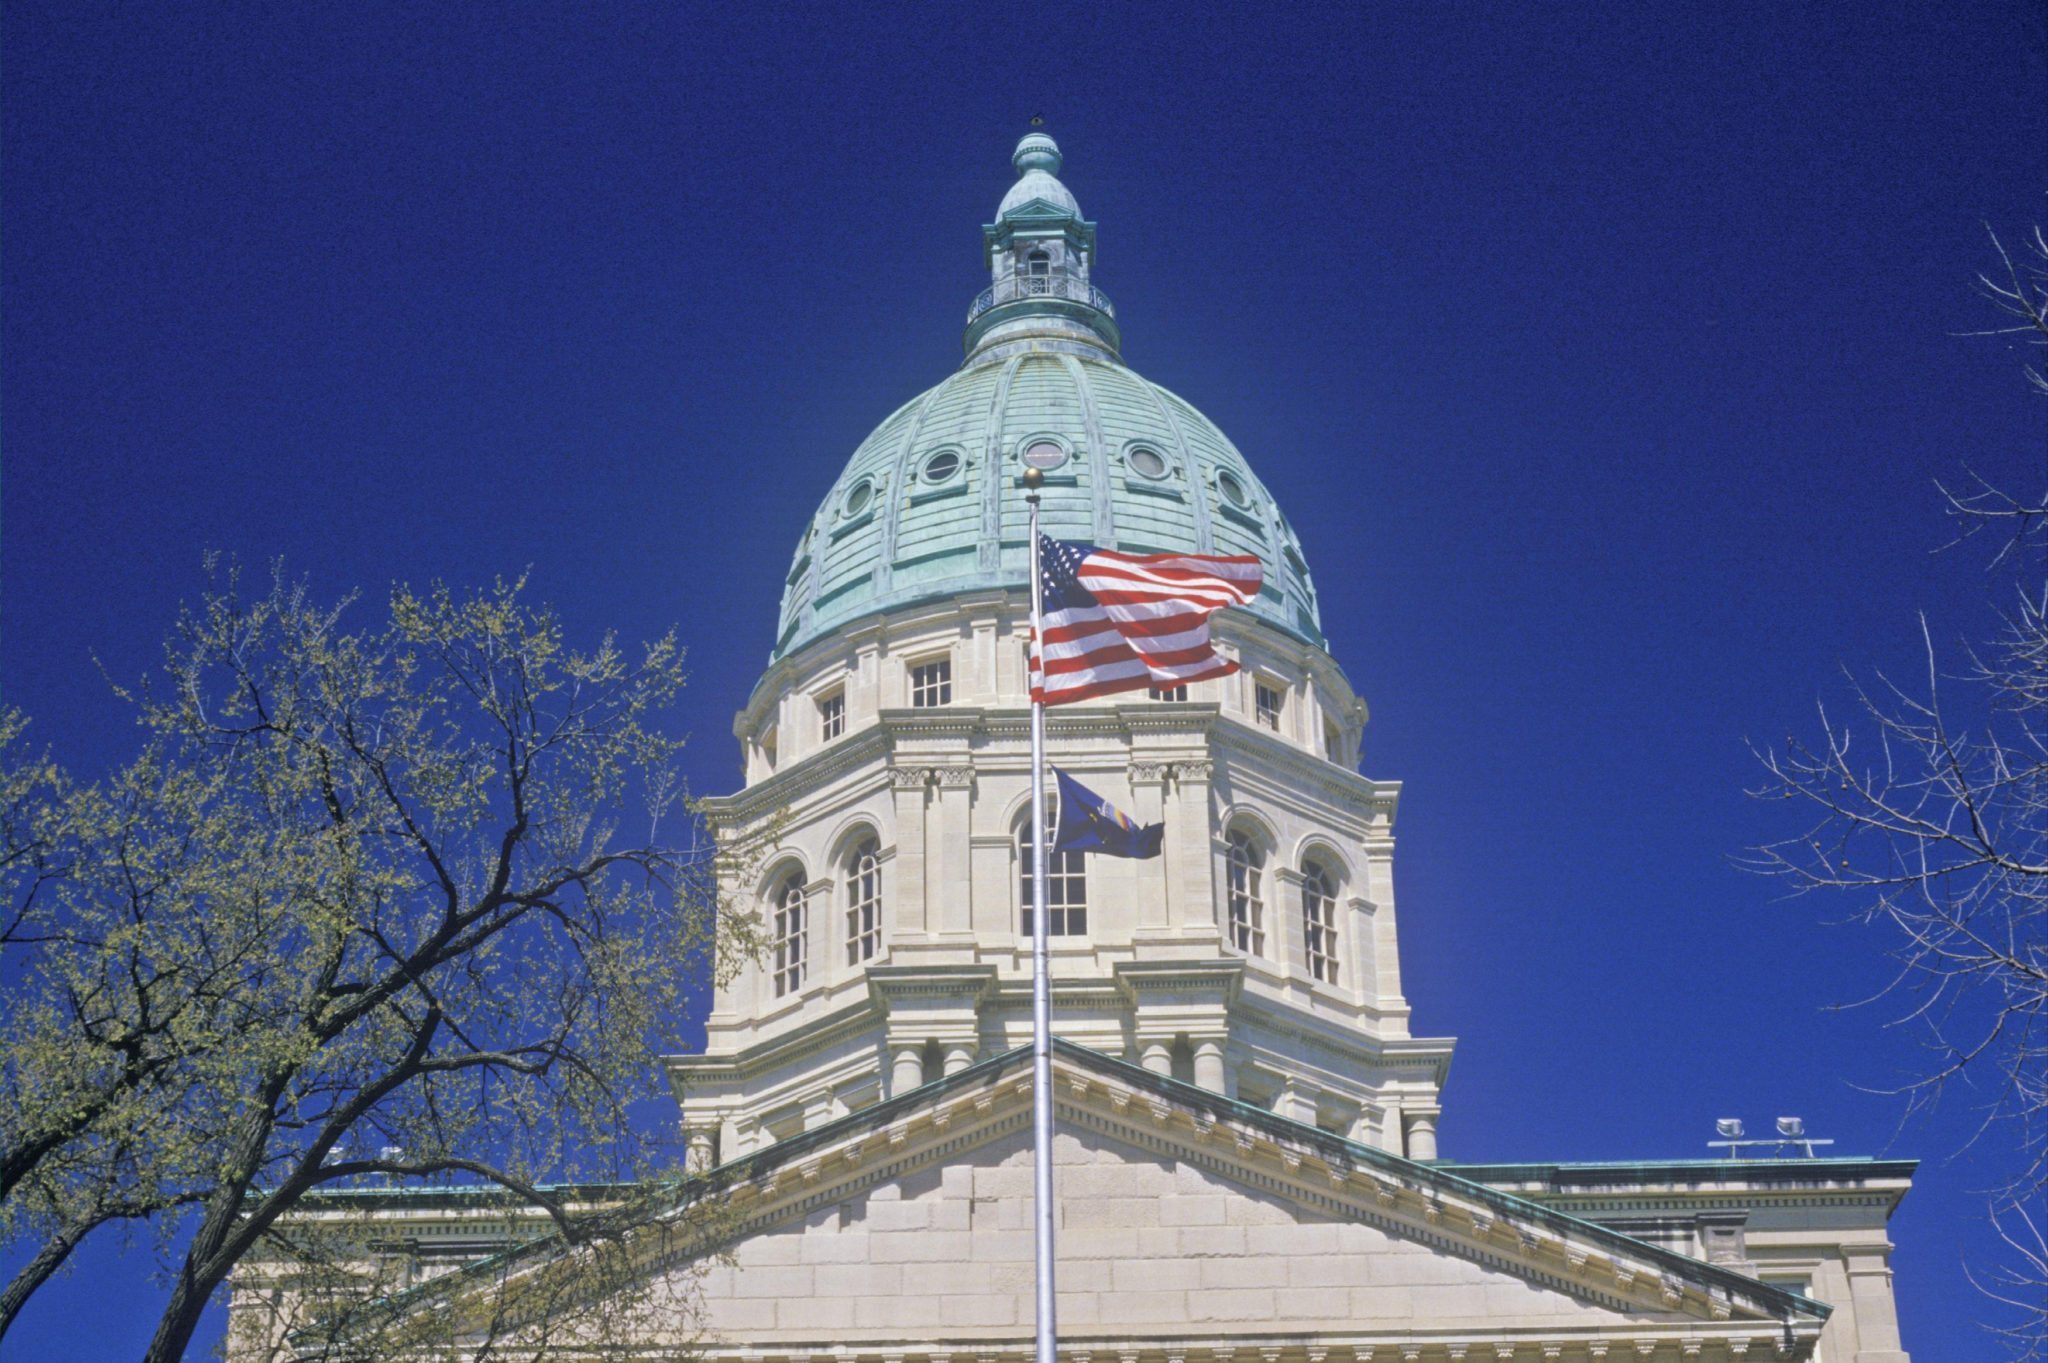 Dome of the Kansas state capitol with an American flag flying in front.